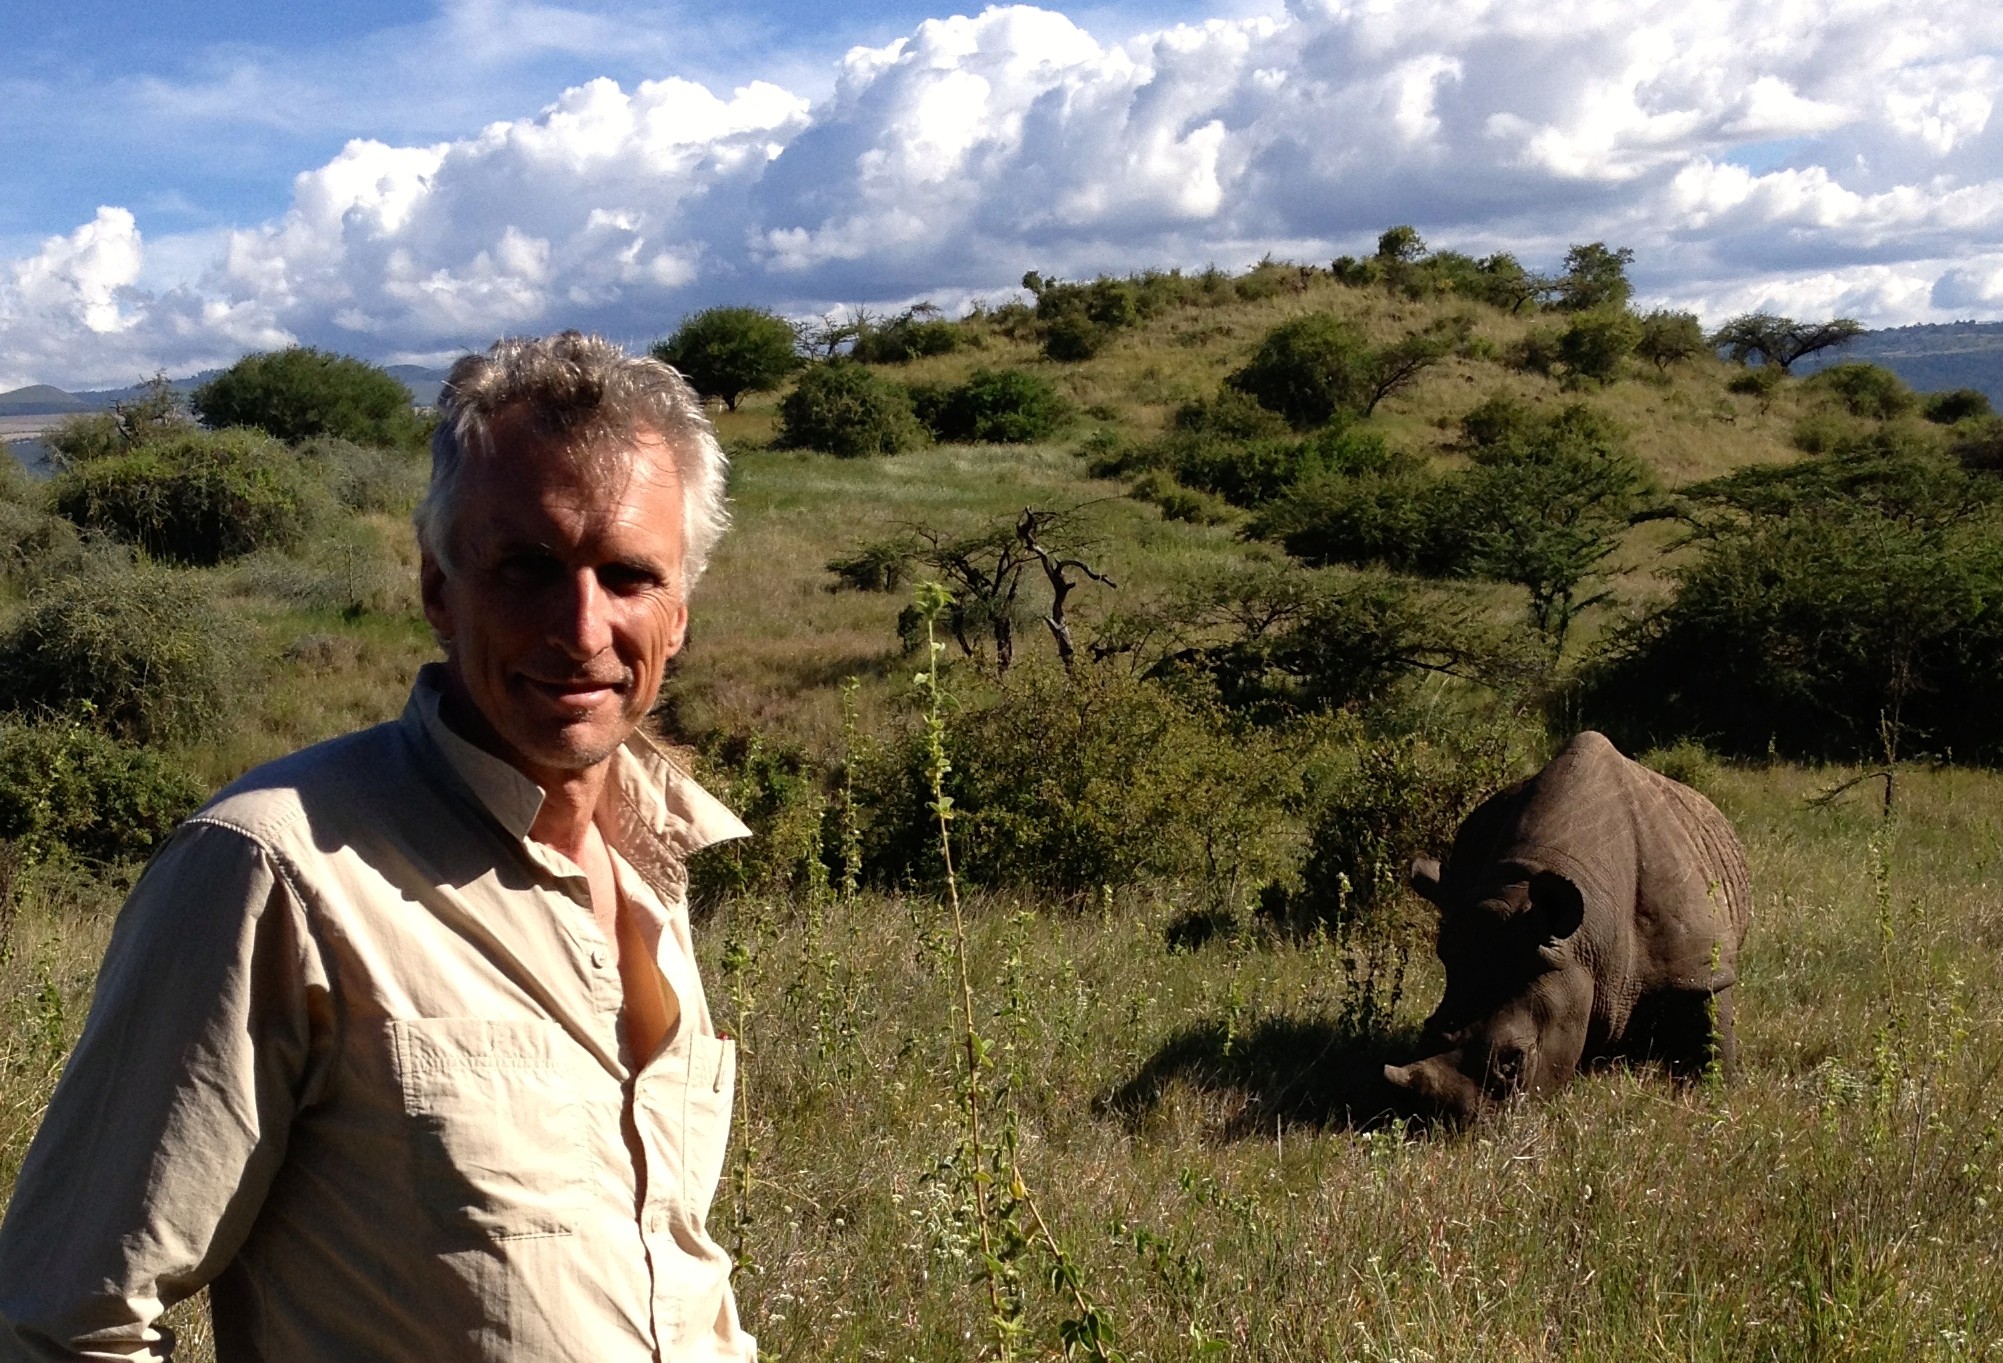 Paul McIntosh with an orphaned black rhino at Lewa during filming of Running Wild – it has since returned to the wild.